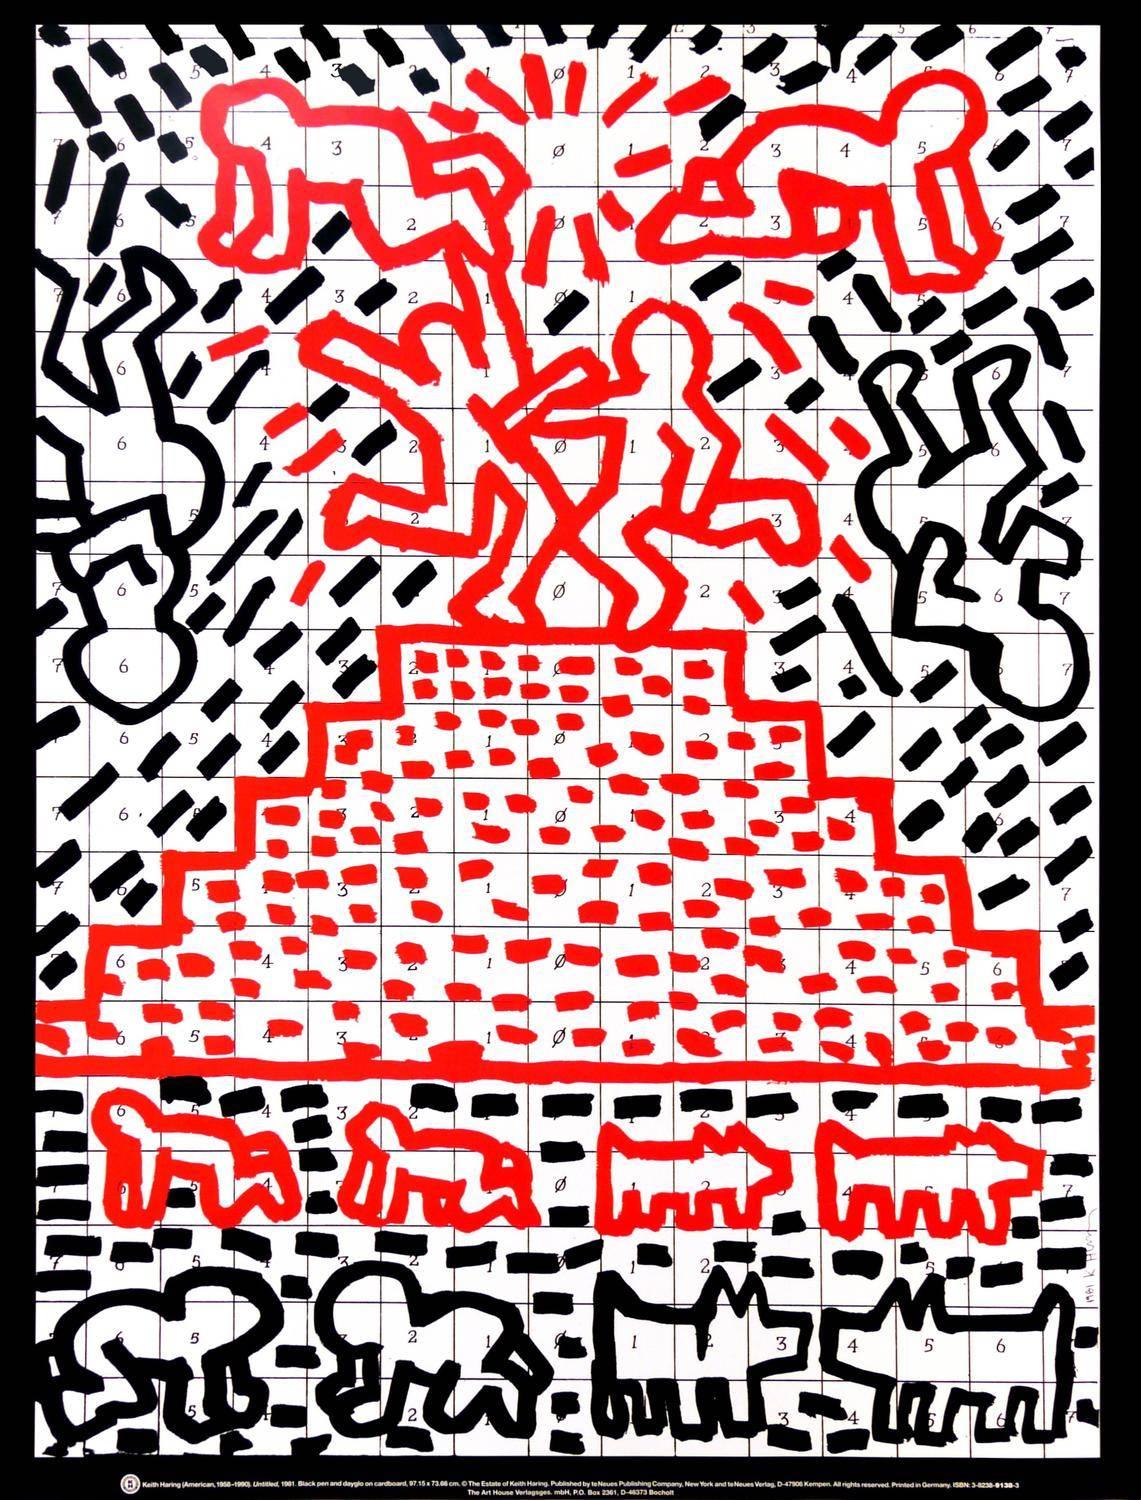 Vintage Keith Haring Poster. Off-Set lithograph after an original drawing &quot;Unititled, 1981.&quot; Published by the Estate of Keith Haring &amp; te Neus circa 1991

Off-set lithograph, 30 x 22.5 in (76 x 57 cm)
Plate Signed and copyrighted by